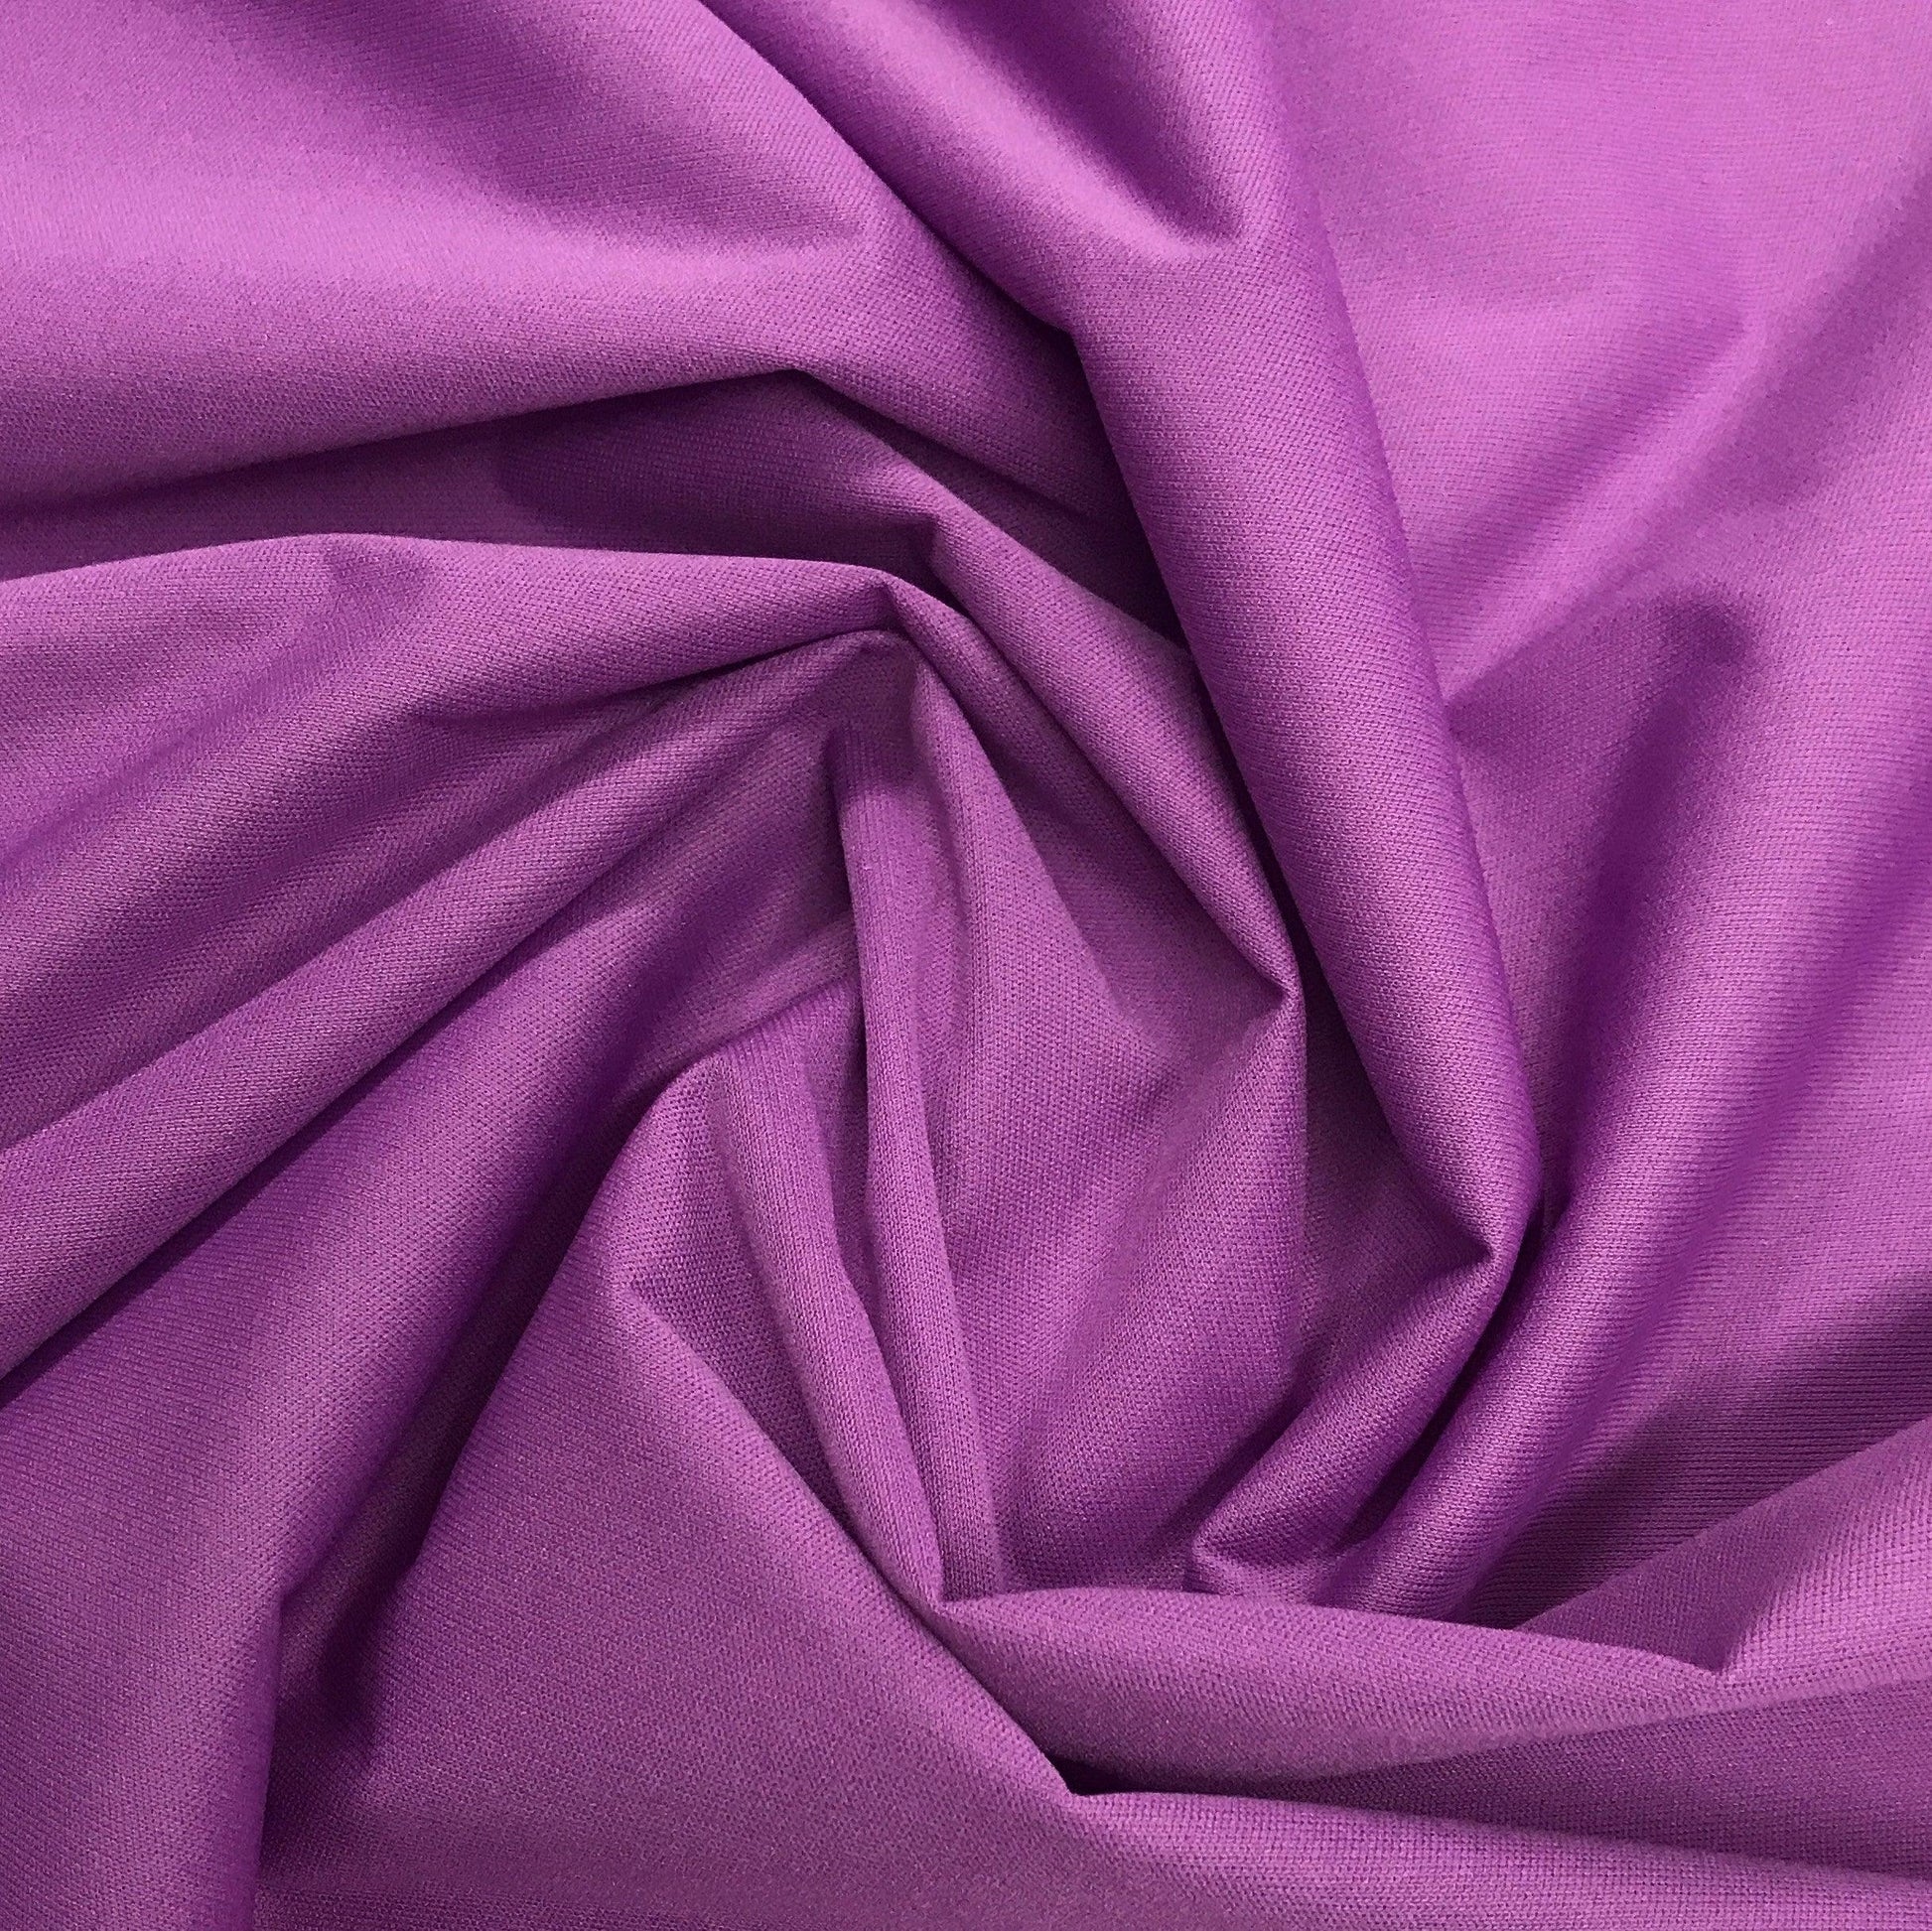 Violet 1 mil PUL Fabric - Made in the USA